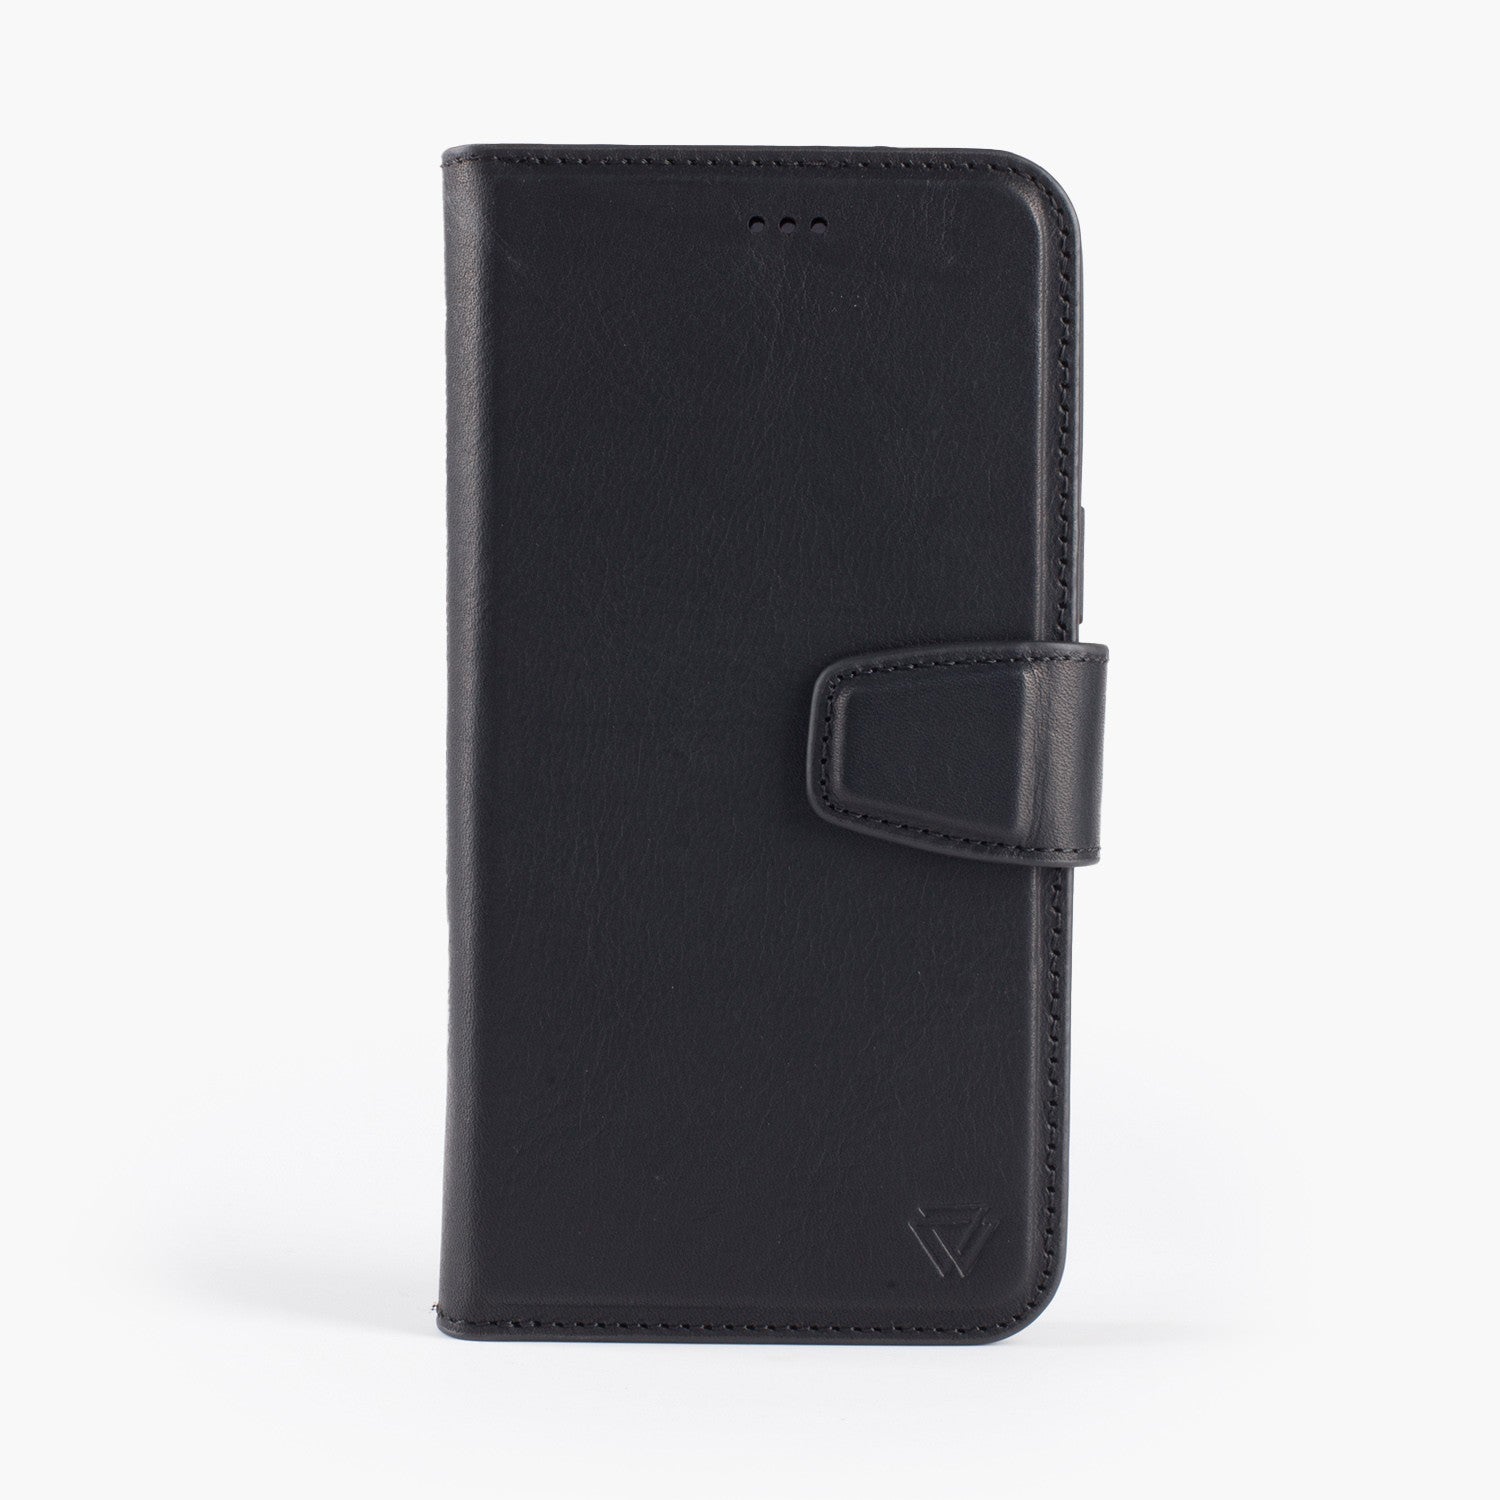 Wachikopa leather Magic Book Case 2 in 1 for iPhone 14 Pro Max Black